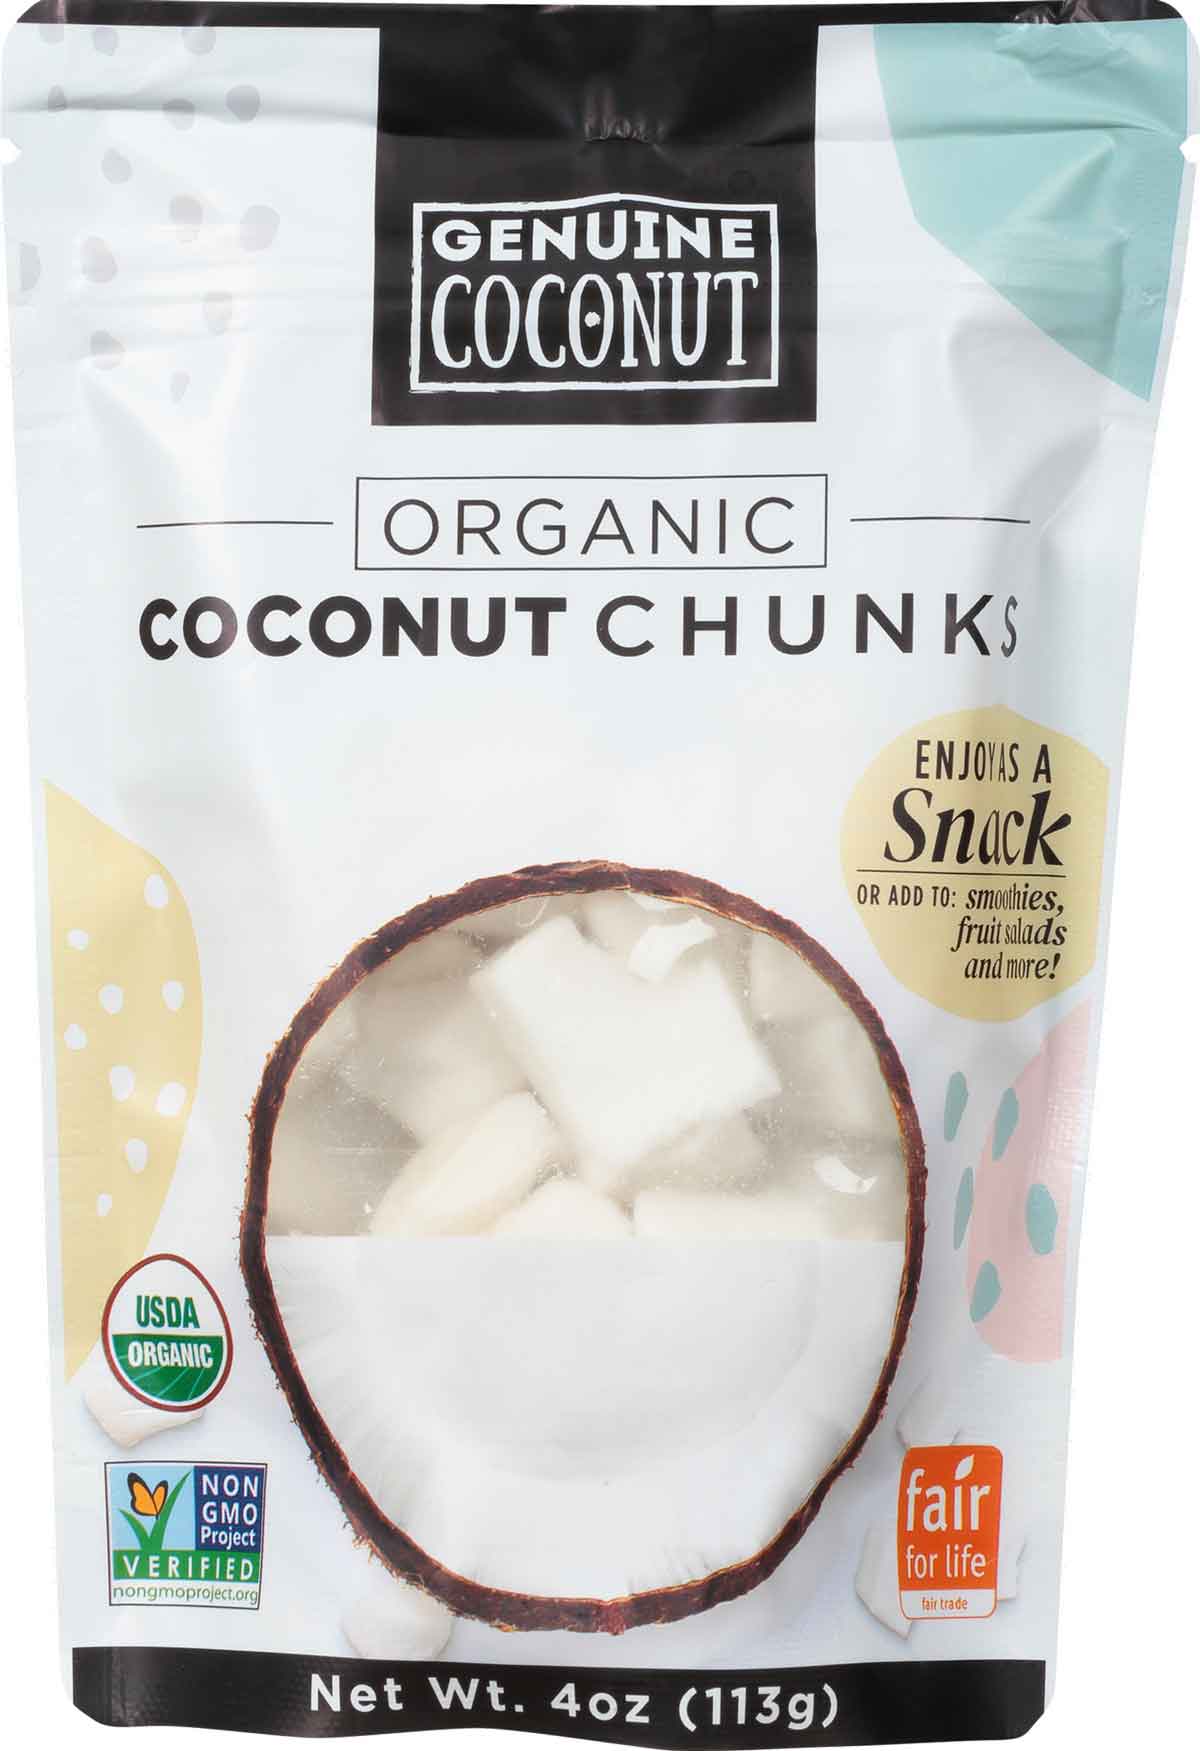 Front view of Genuine Coconut's Coconut Chunks package